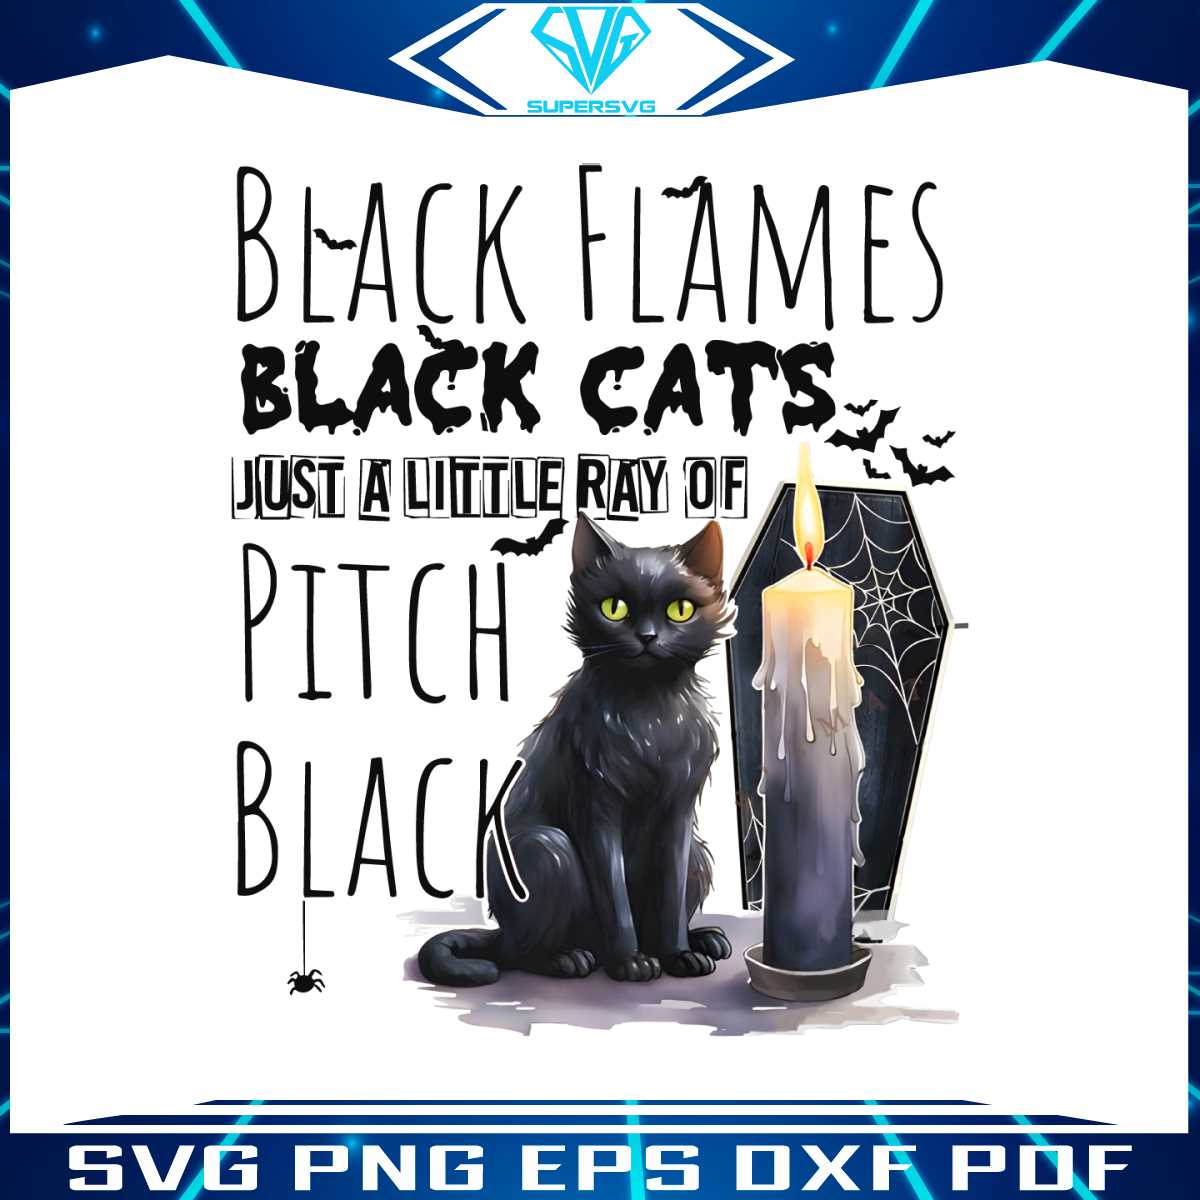 black-flames-black-cats-just-a-little-ray-of-pitch-black-svg